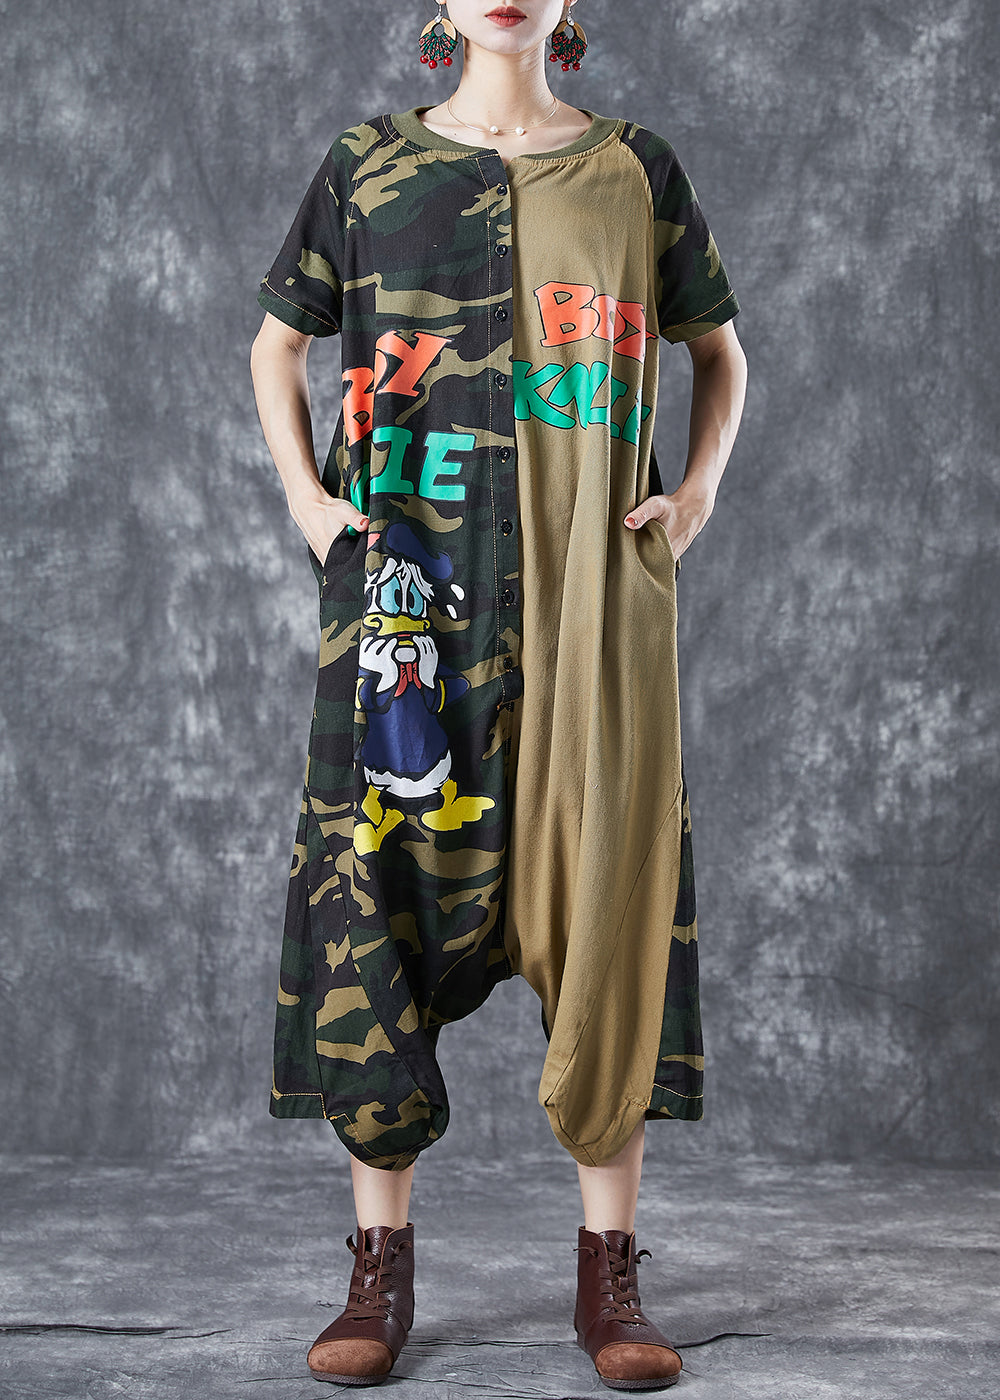 Chic Camouflage Oversized Patchwork Appliques Cotton Jumpsuits Summer